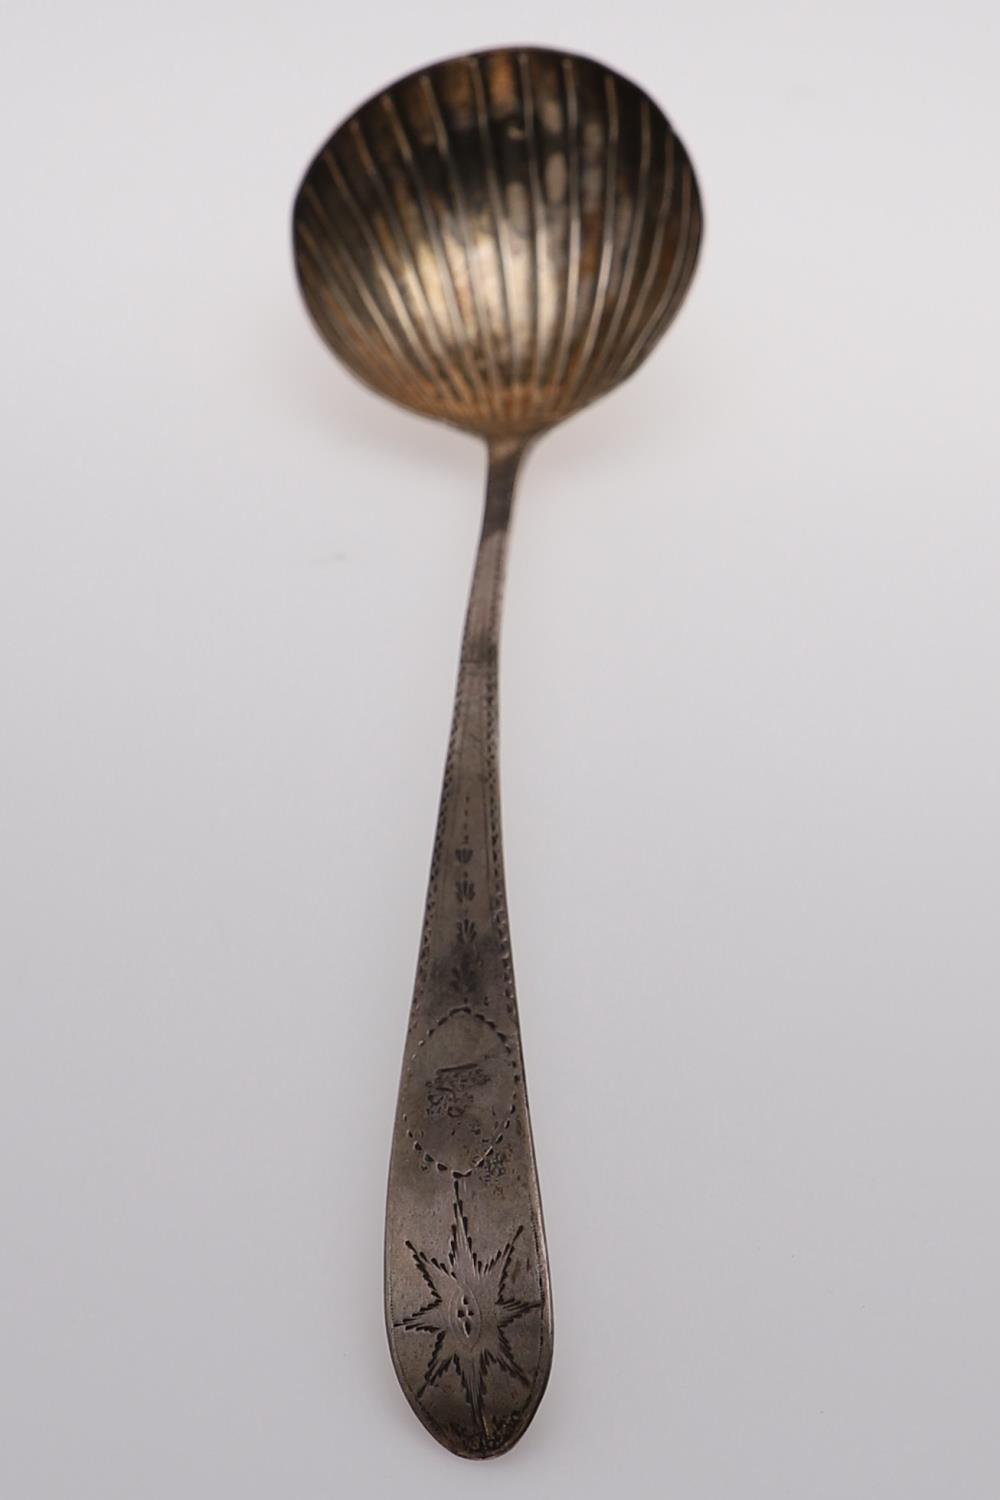 A GEORGE III IRISH, BRIGHT-CUT AND STAR PATTERN SOUP LADLE. - Image 3 of 7